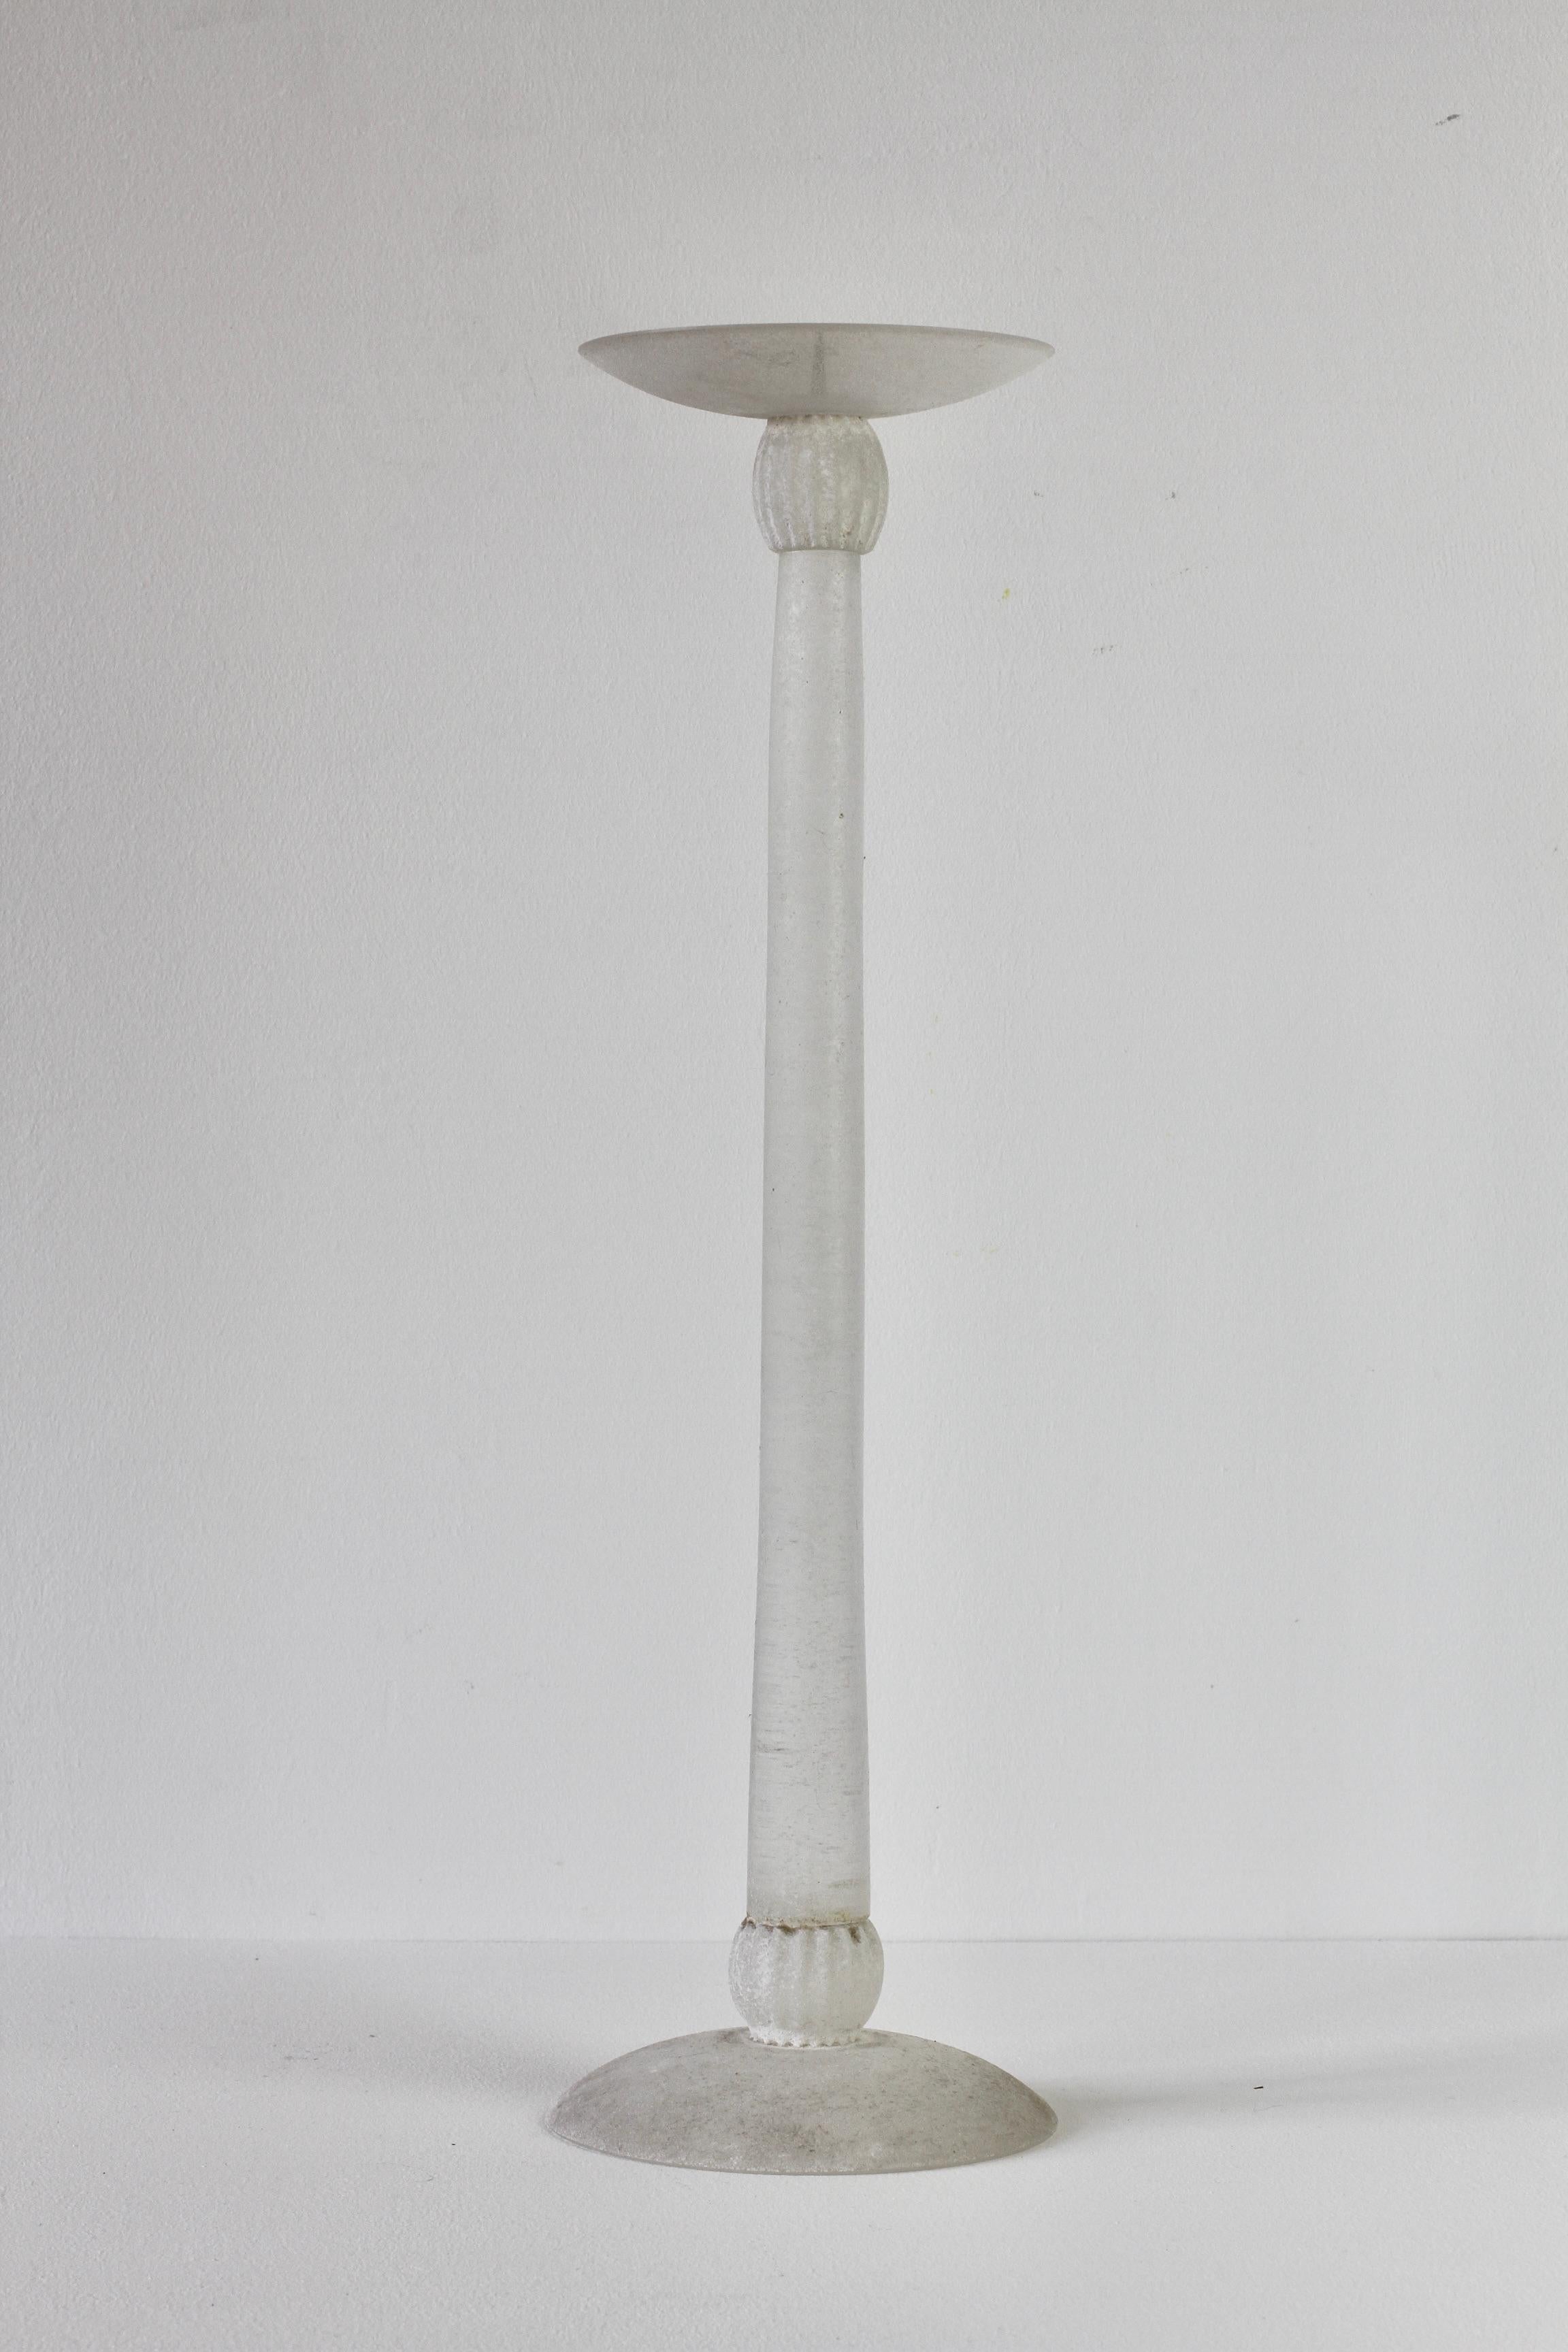 Monumental, large and elegant vintage Italian 21 inch tall 'a Scavo' white colored / coloured glass Candelabra or candlestick holder / stand by Seguso Vetri d'Arte Murano, Italy. Elegant in form and showing extraordinary craftsmanship with the use